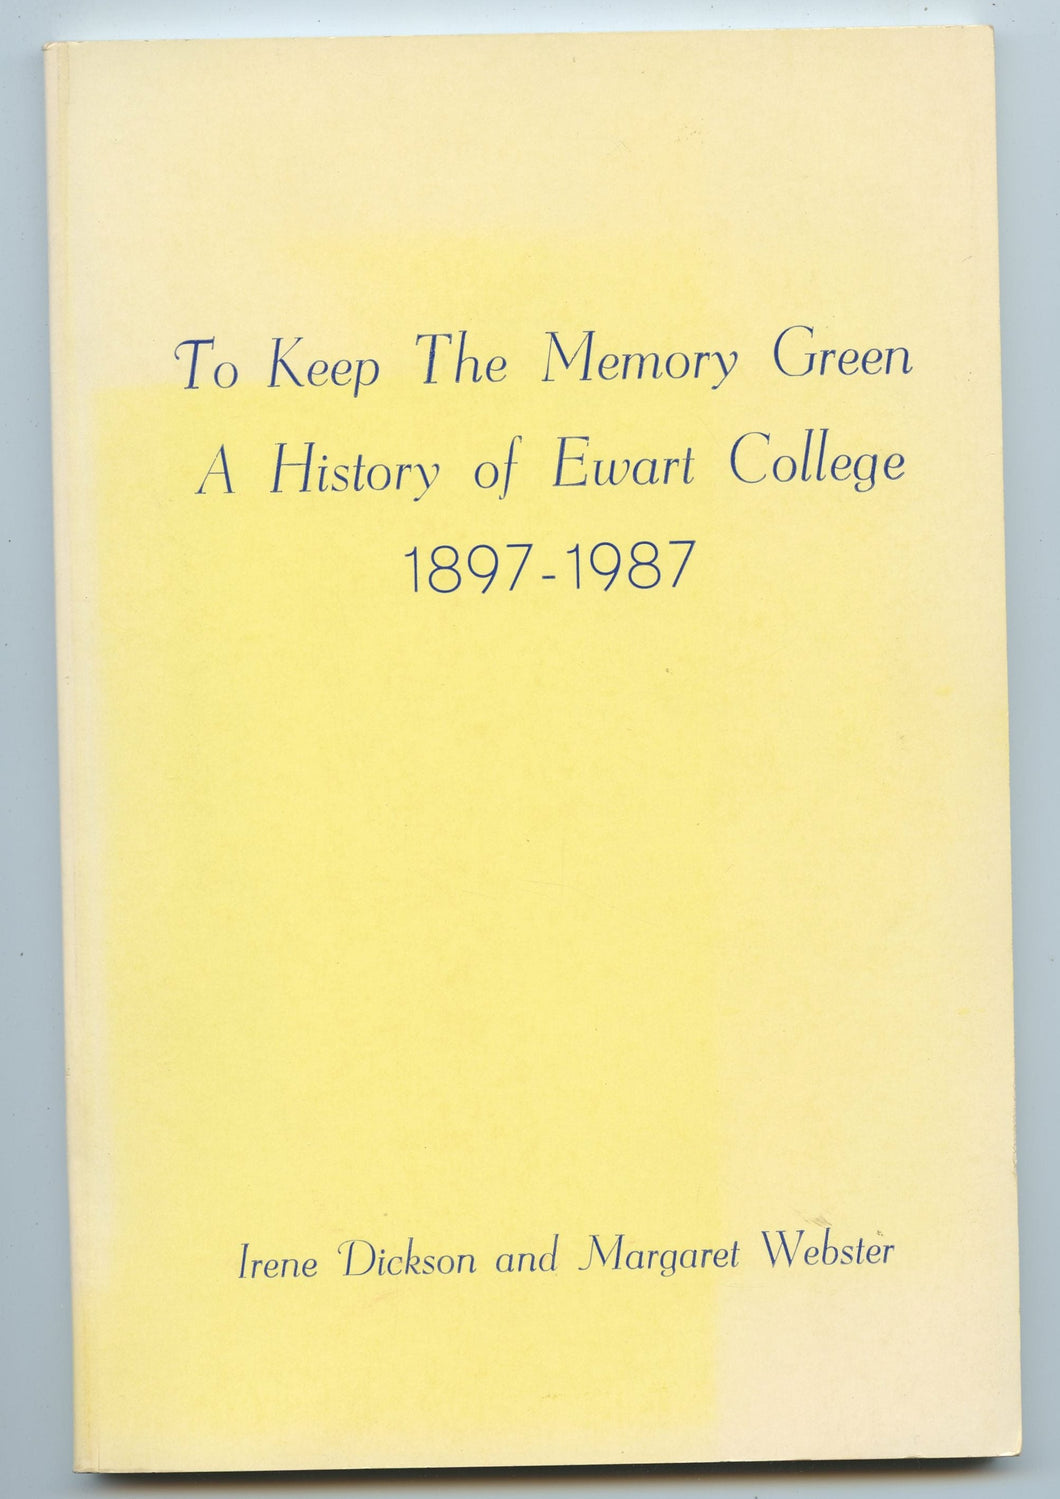 To Keep The Memory Green: A History of Ewart College 1897-1987